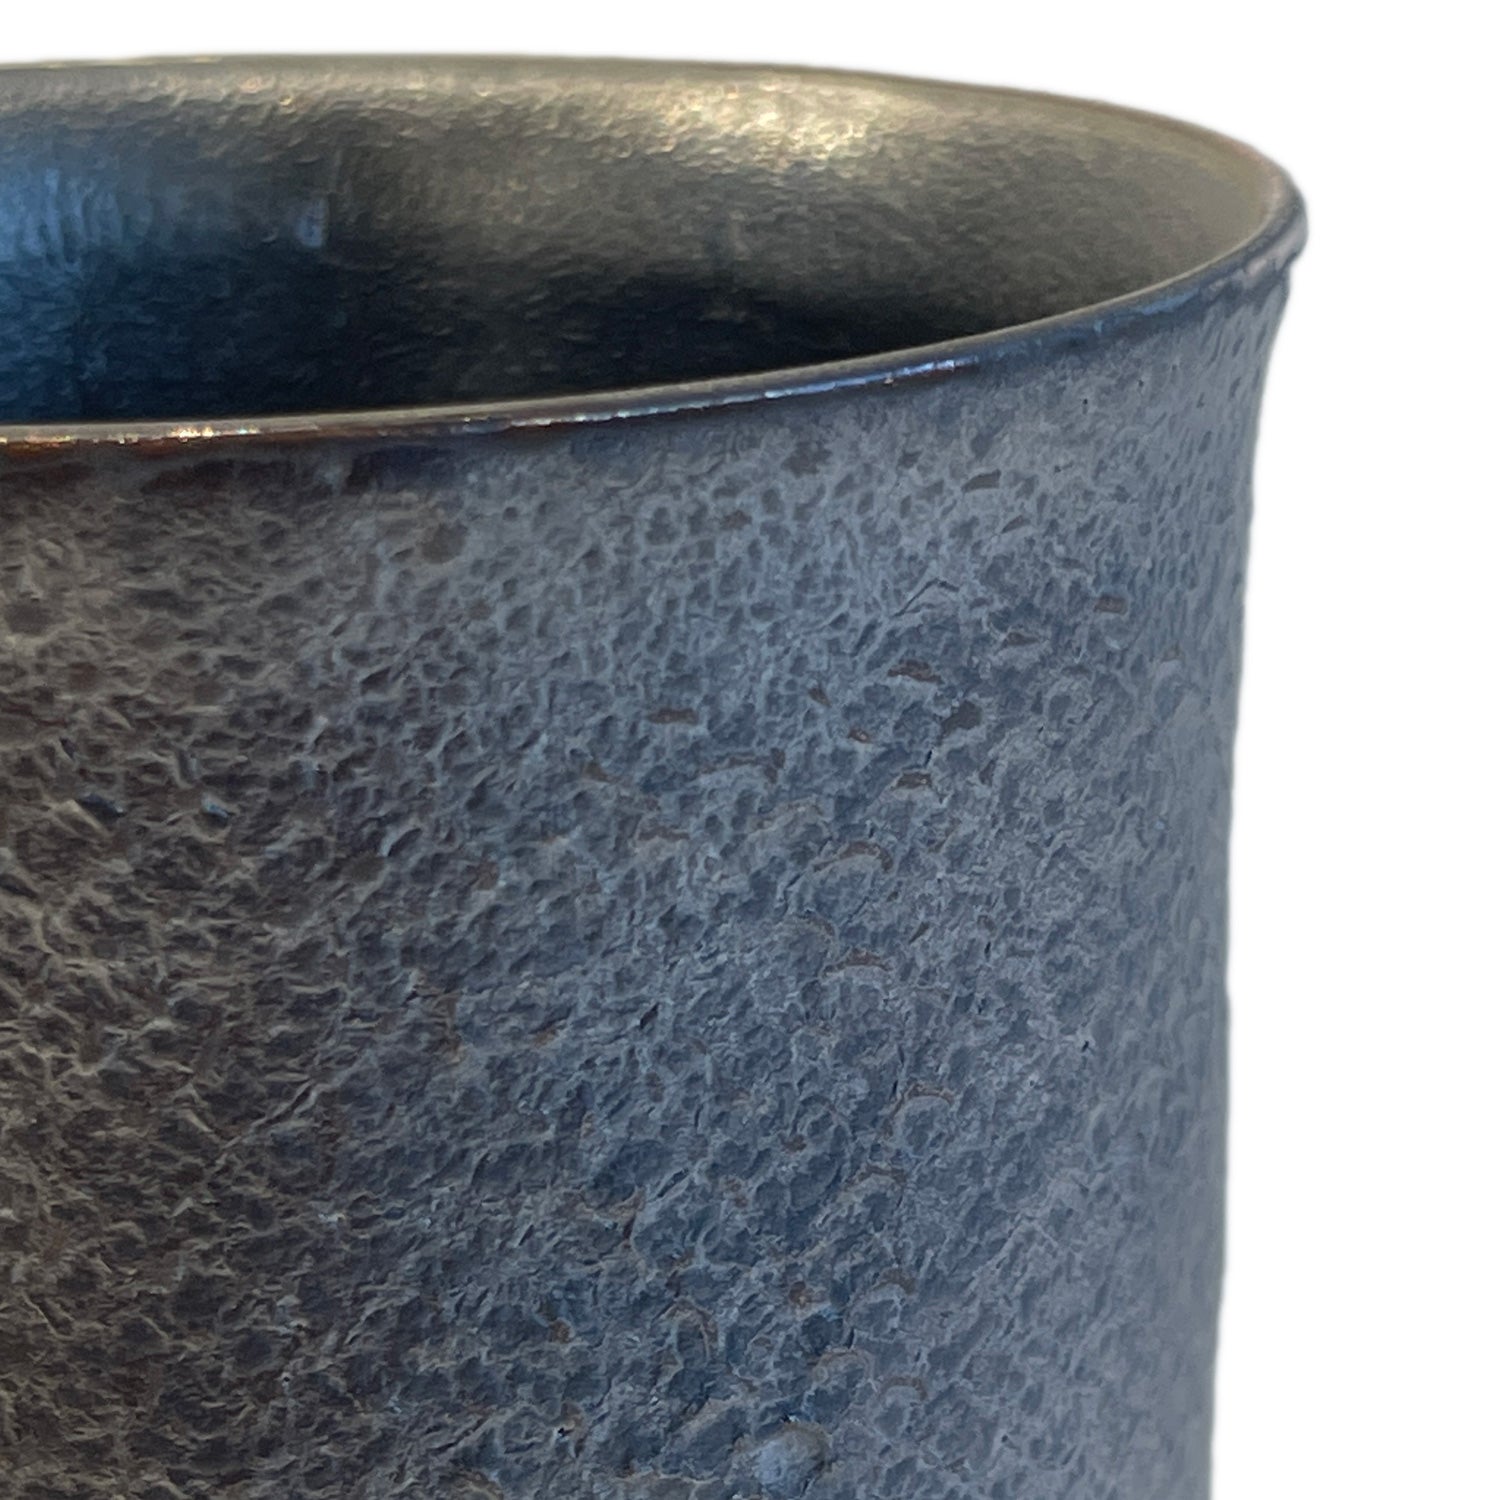 Load image into Gallery viewer, SHIRO HAMANAKA CERAMIC CUP LEATHER LACE SH066